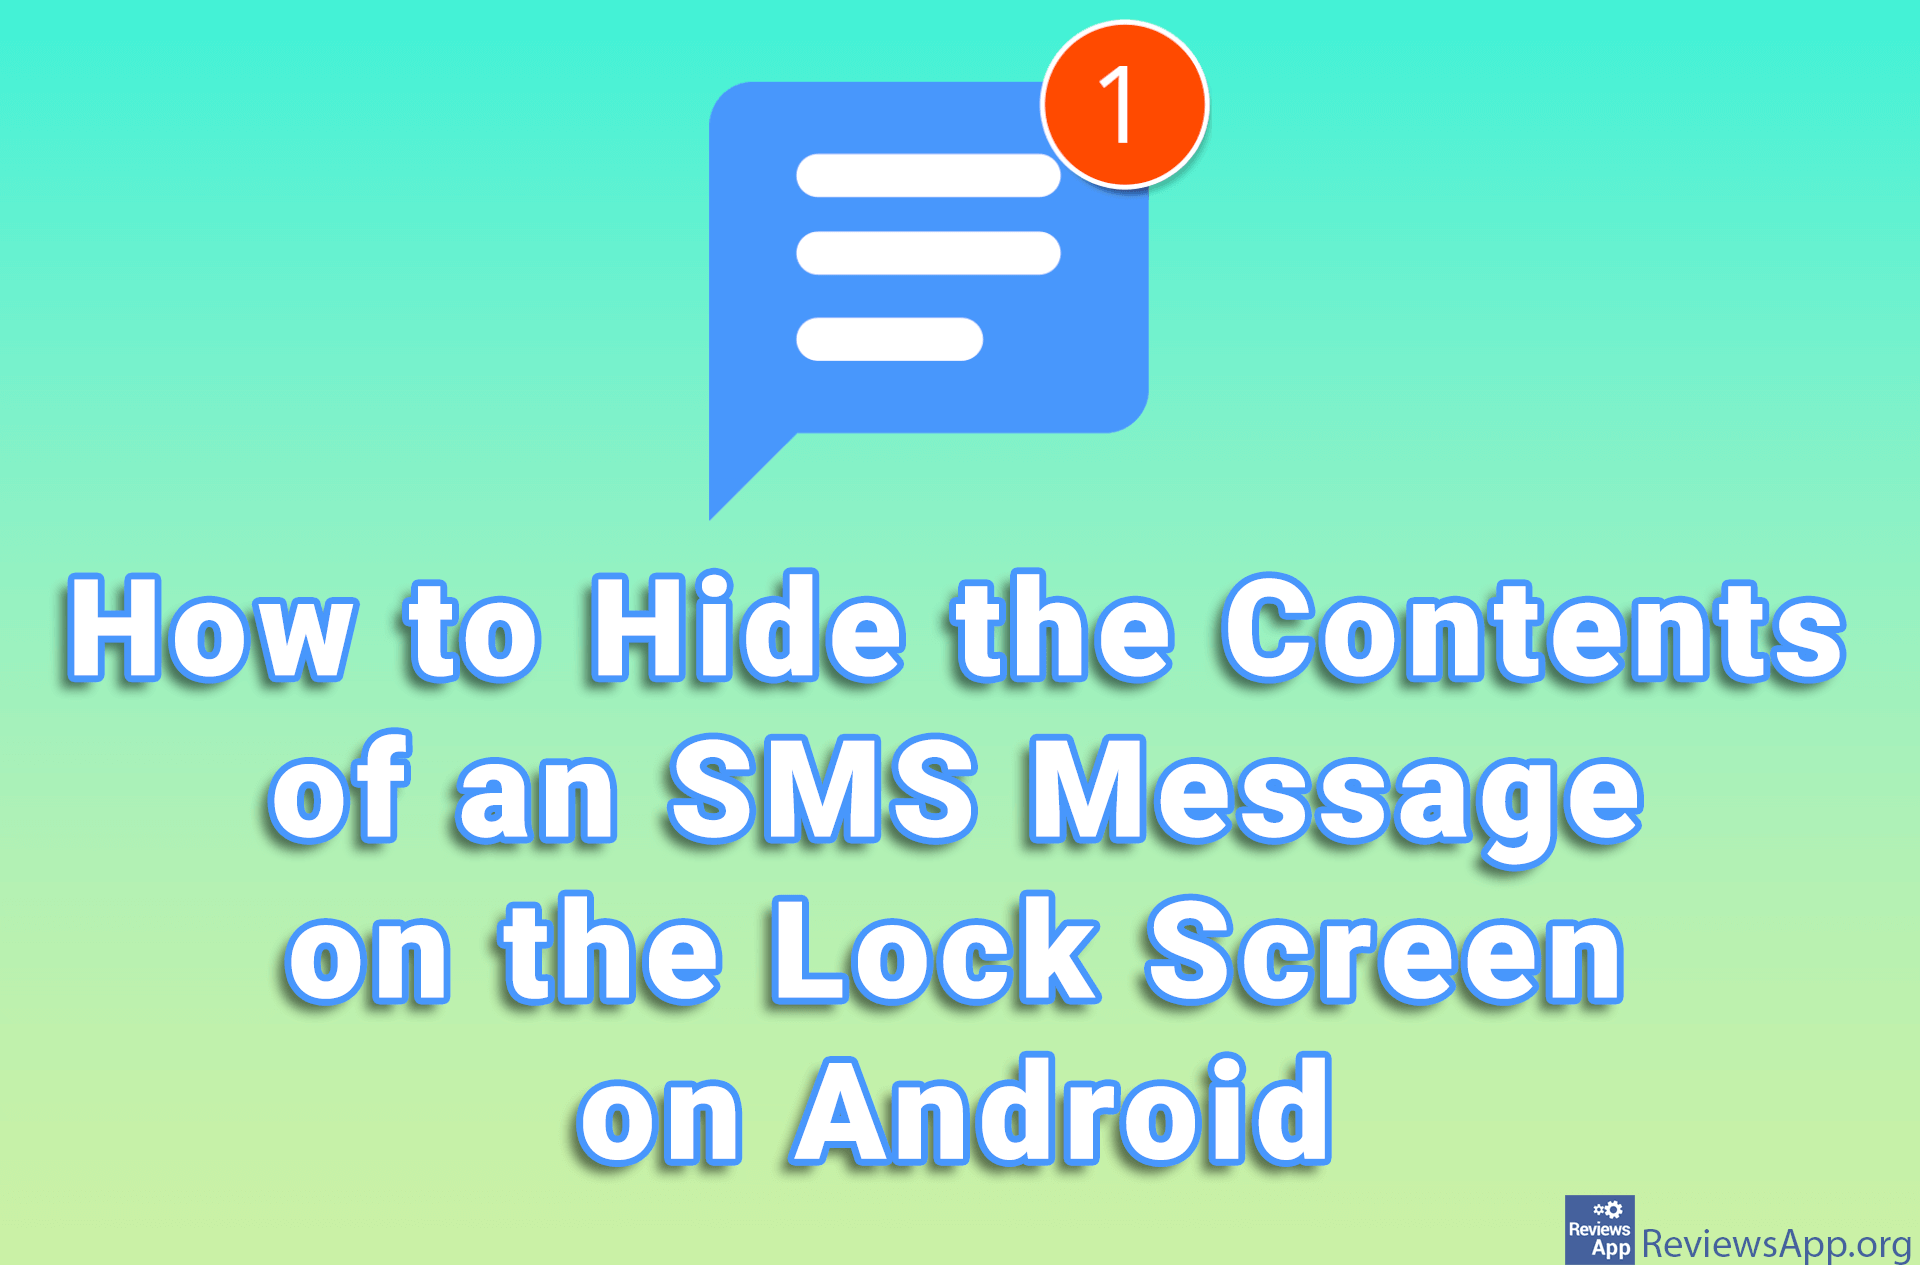 How to Hide the Contents of an SMS Message on the Lock Screen on Android